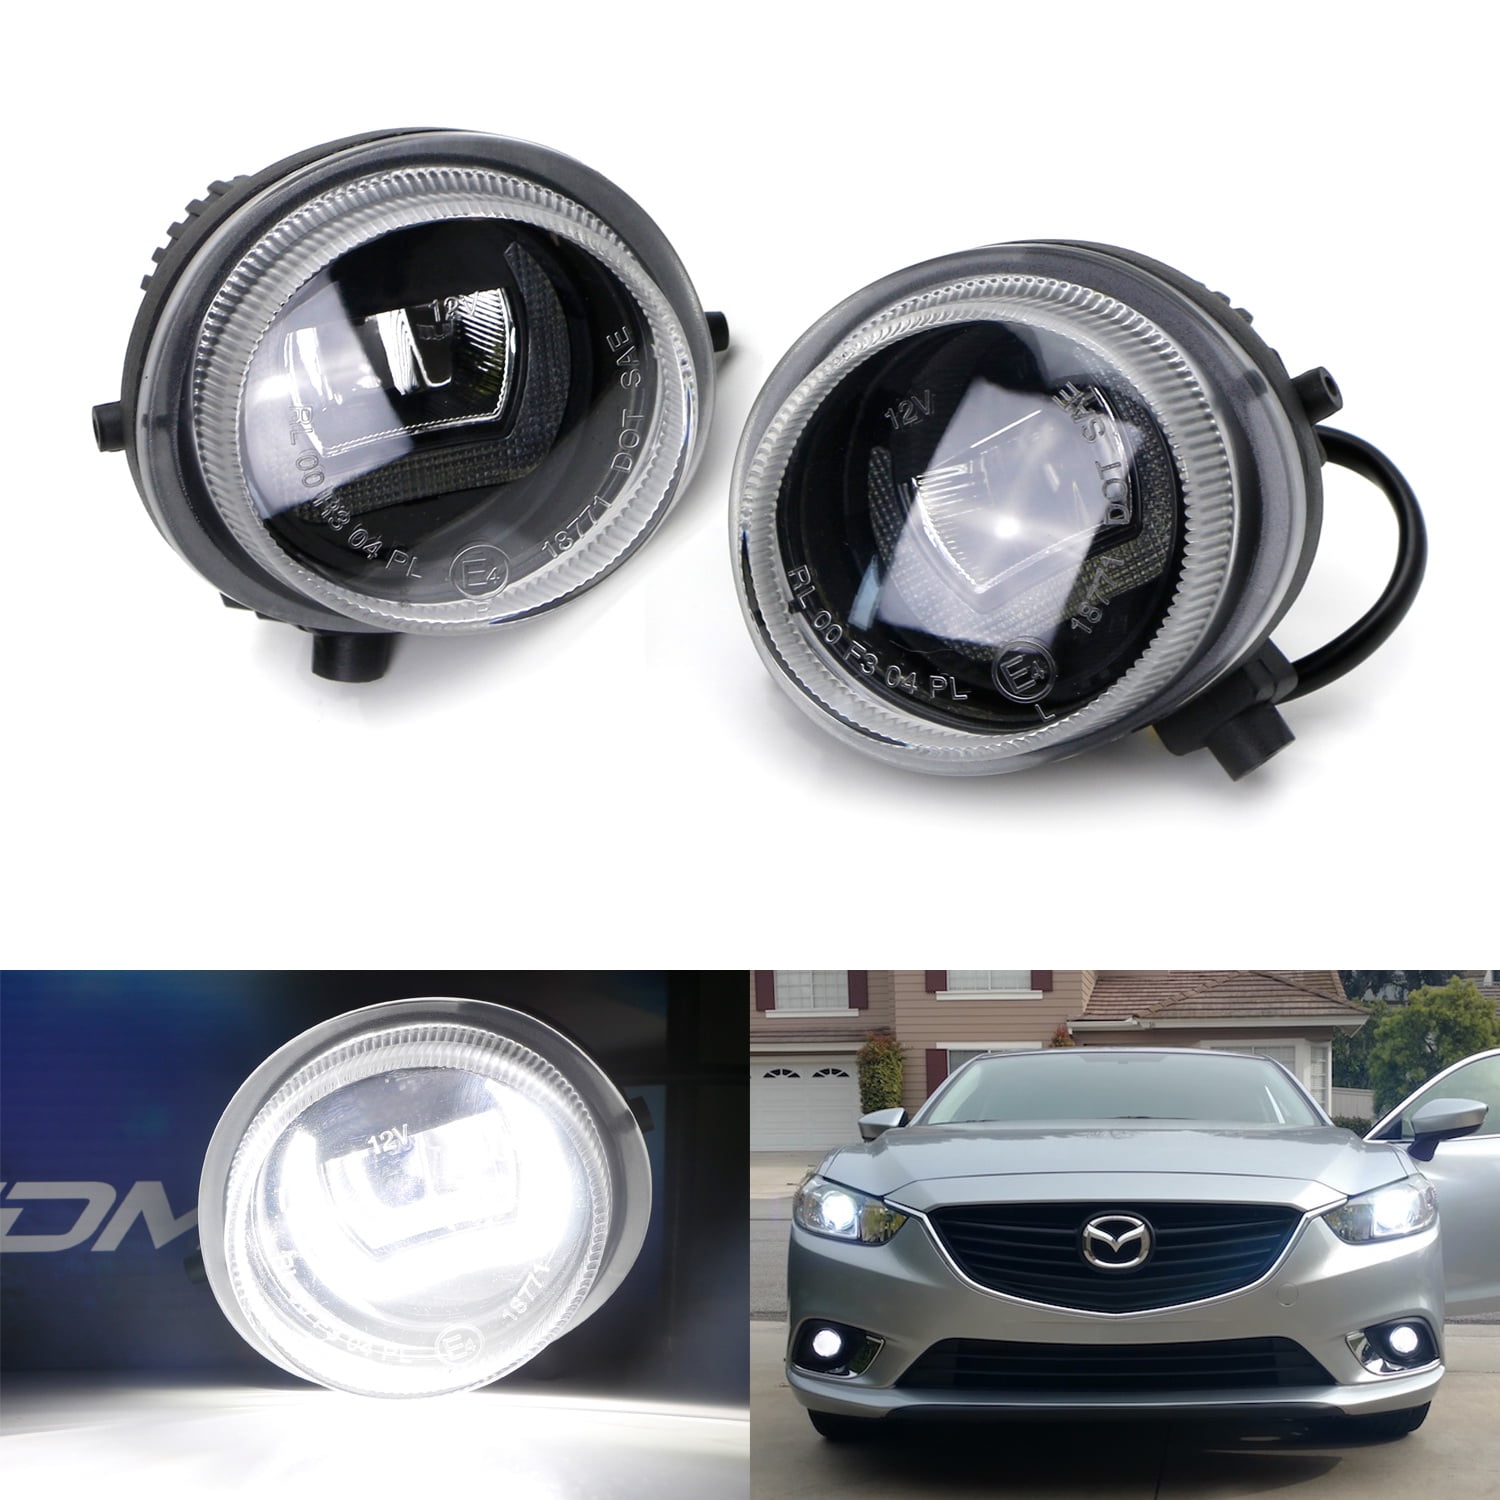 DRL H QAULITY Daytime Running LED Ligts Front Lights C fit MERCEDES II 